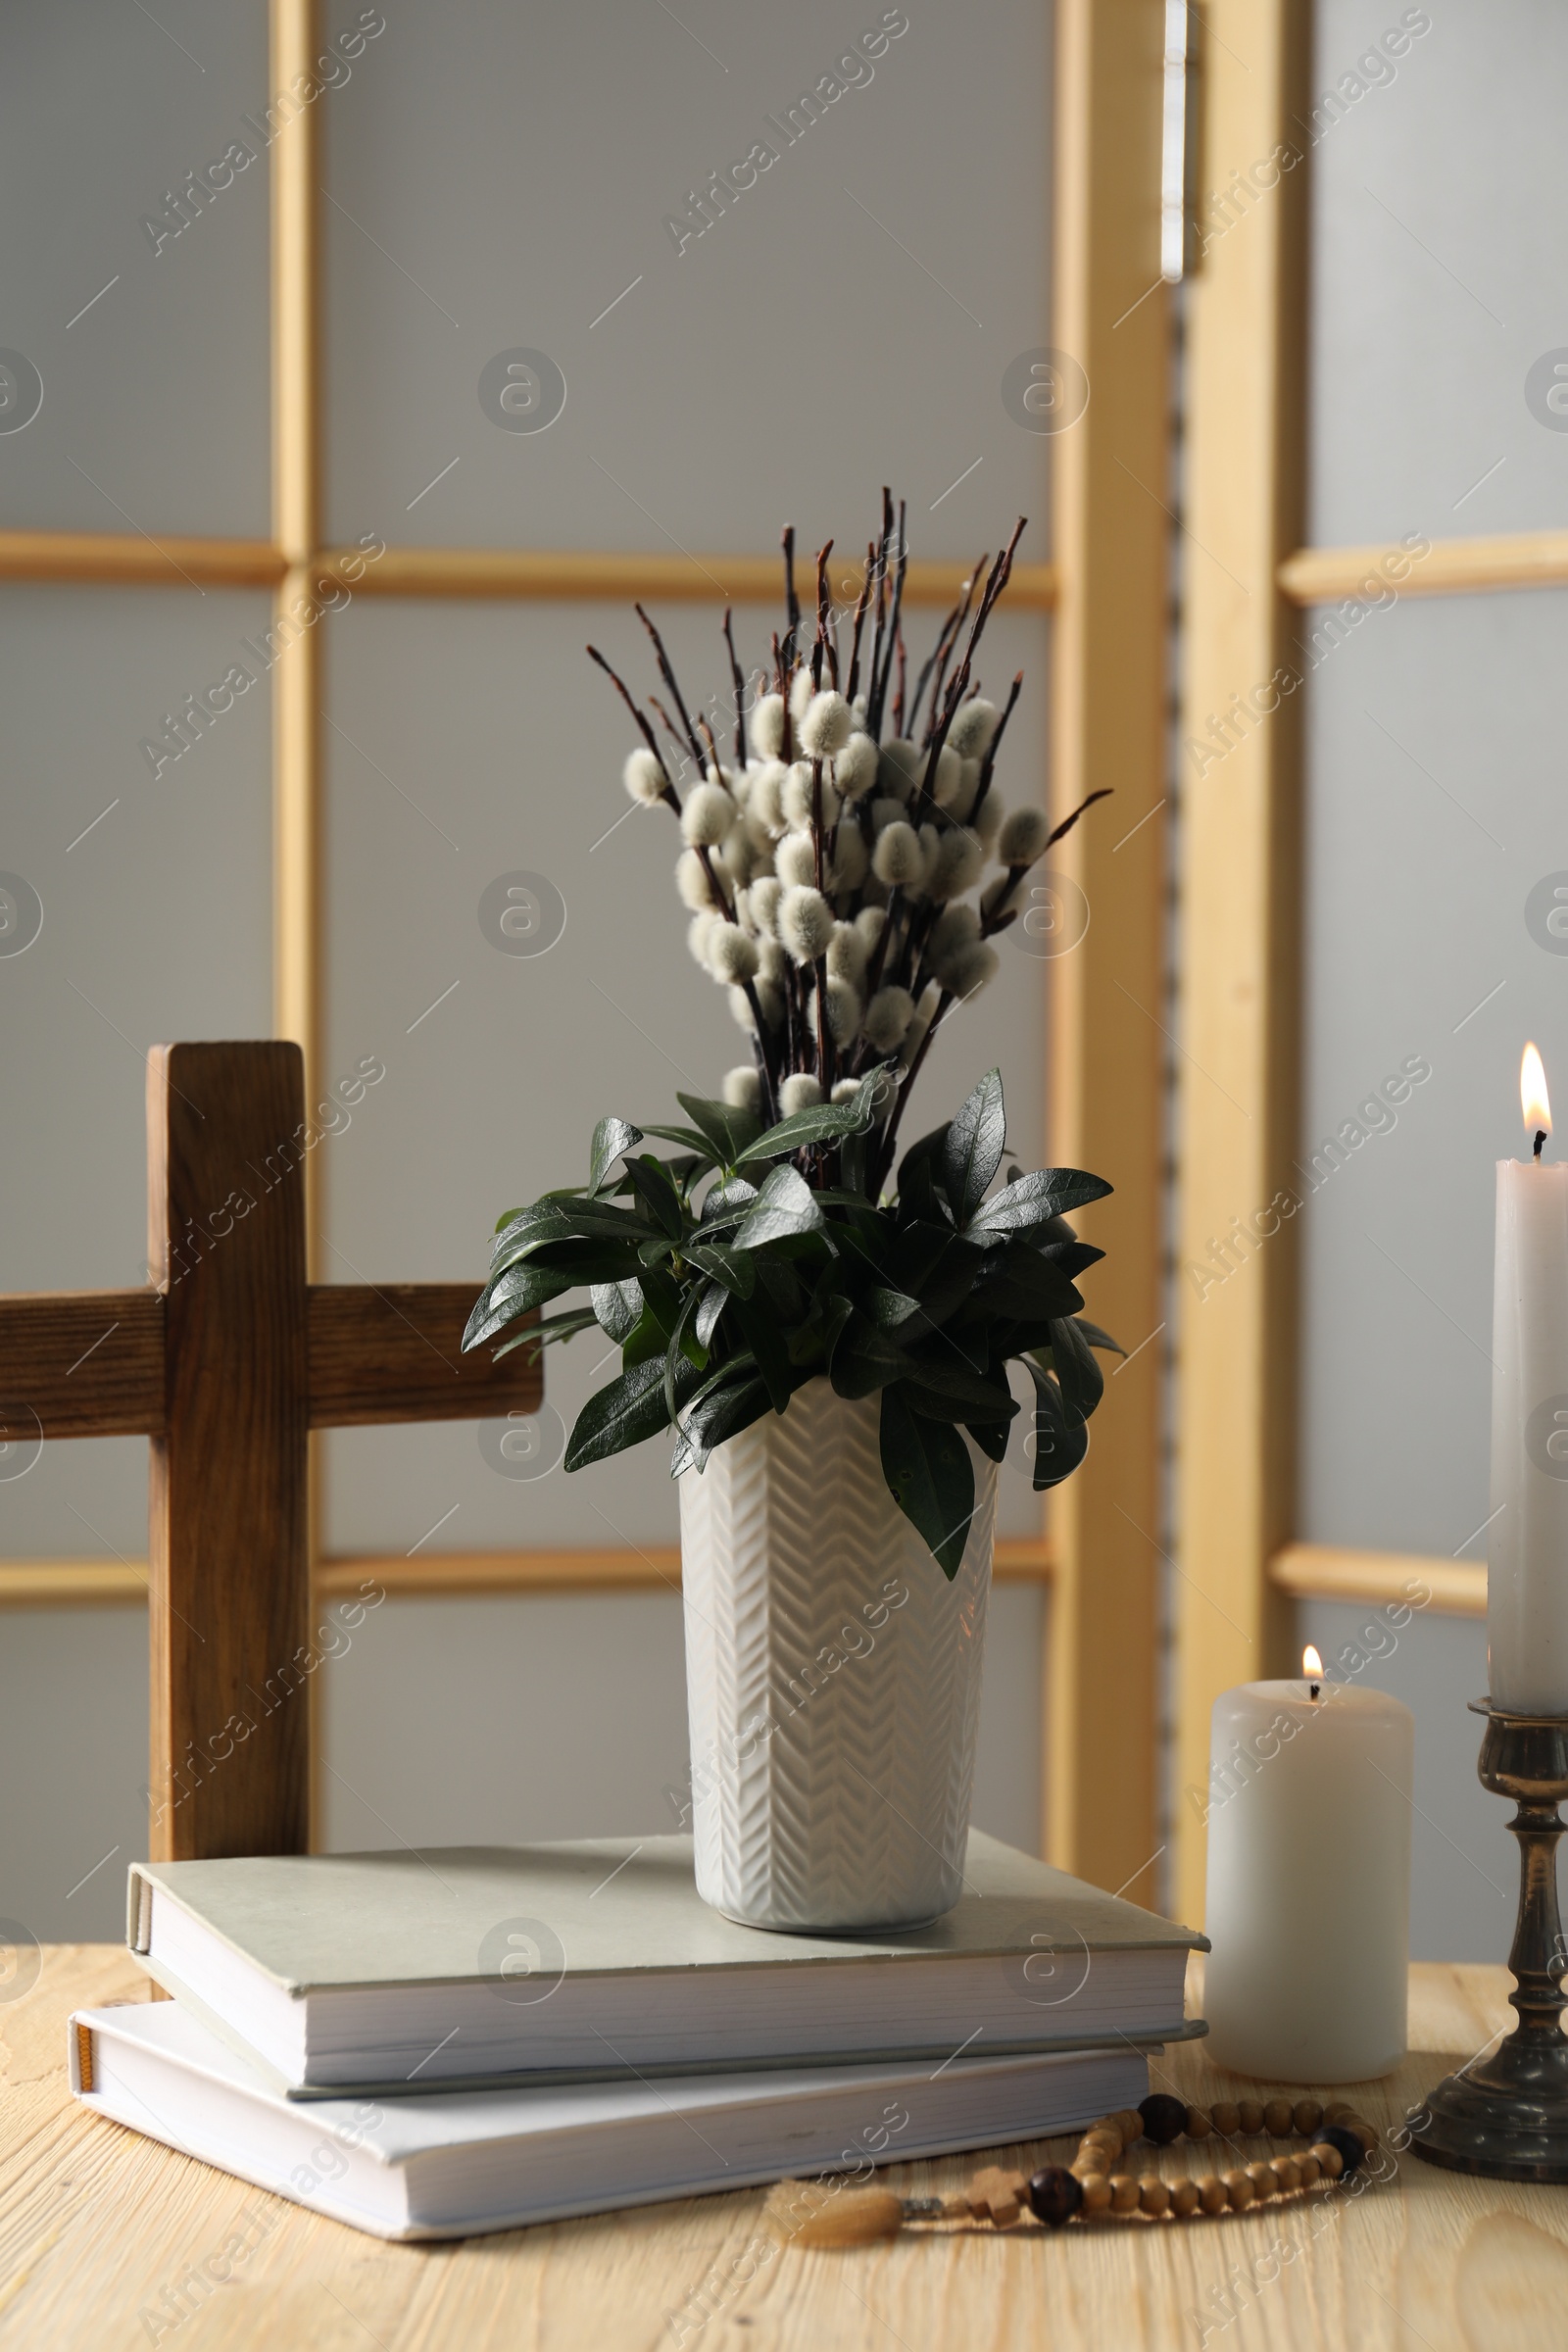 Photo of Cross, burning candles, books, rosary beads and bouquet with willow branches on wooden table